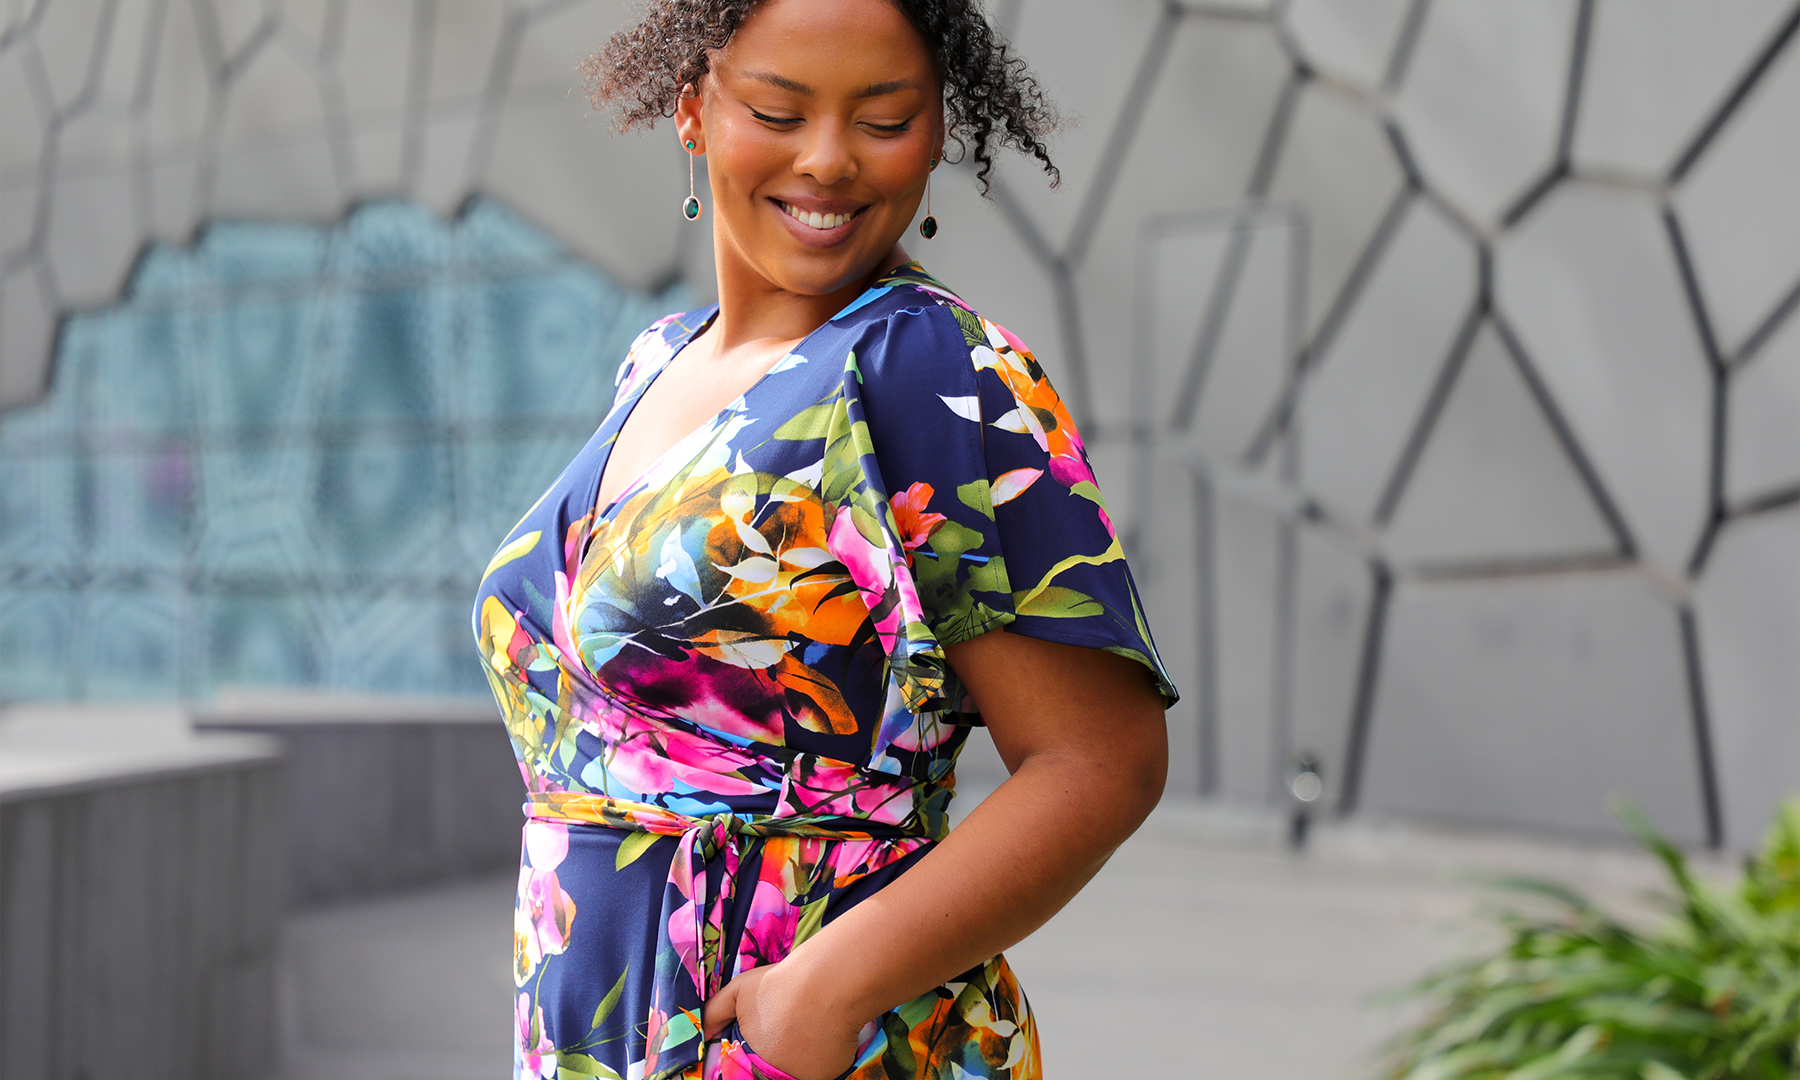 A good wrap dress for plus size and curvy women, this short sleeve floral print wrap dress is by Australian fashion brand Leina & Fleur. Made in Australia, this pretty wrap dress is a great wedding guest outfit snd special event dressing. 